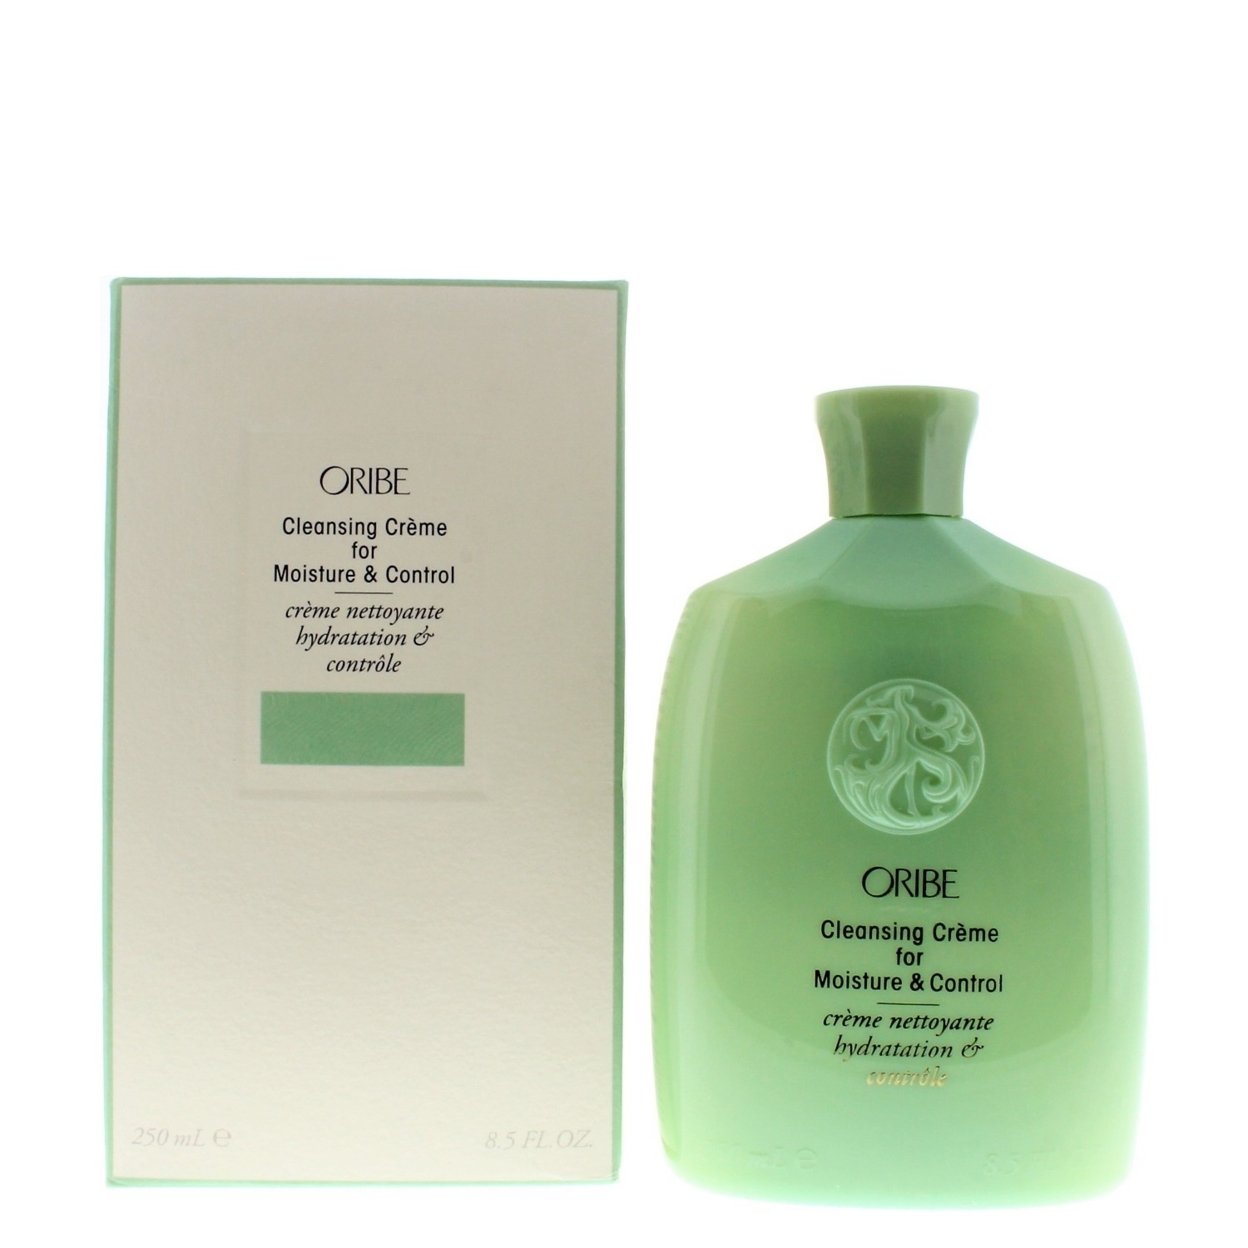 Oribe Cleansing Creme For Moisture & Control 8.5oz/250ml